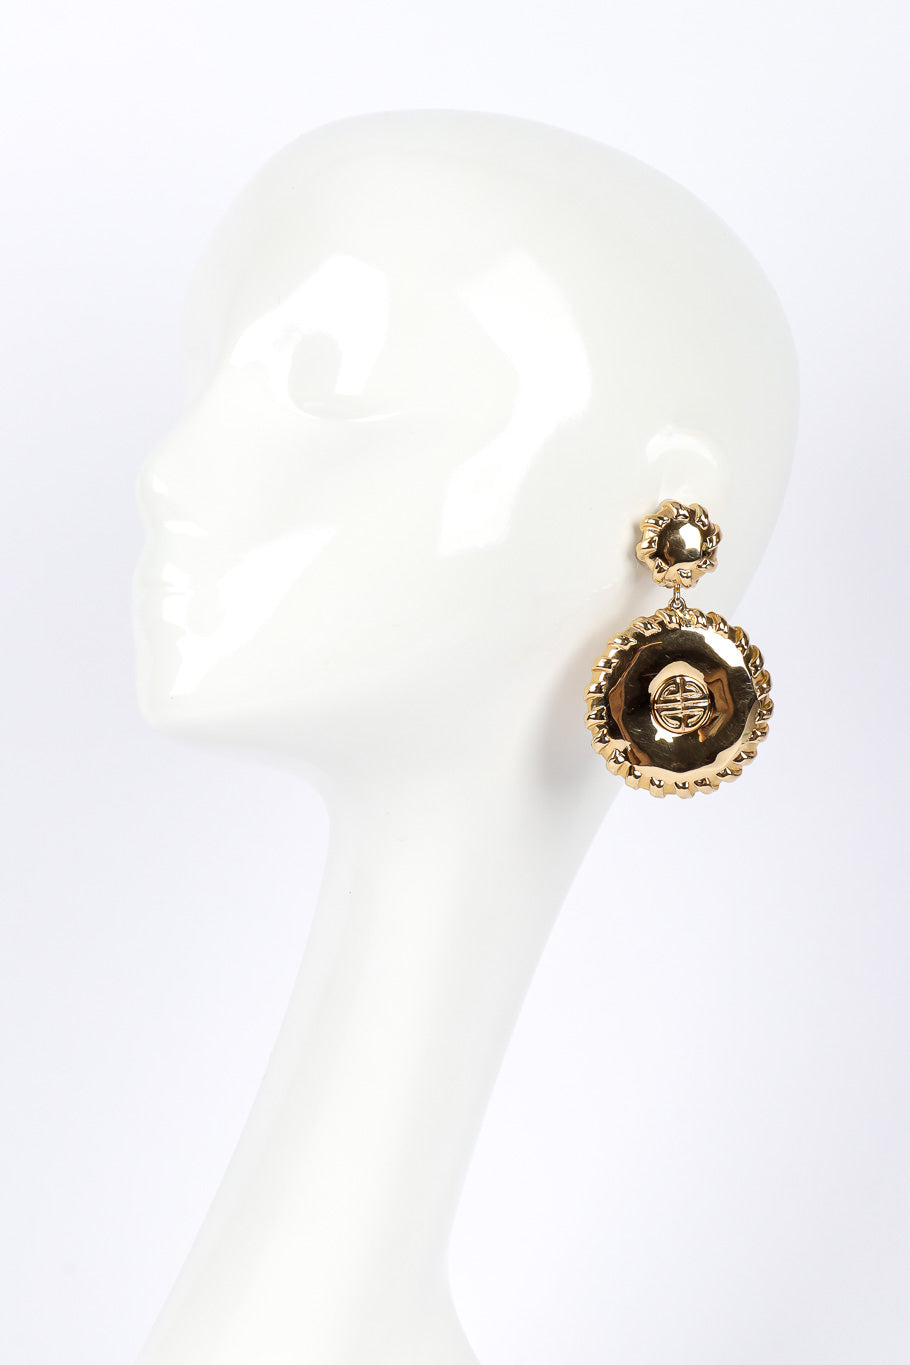 Medallion drop earrings by Givenchy on white background on mannequin head @recessla